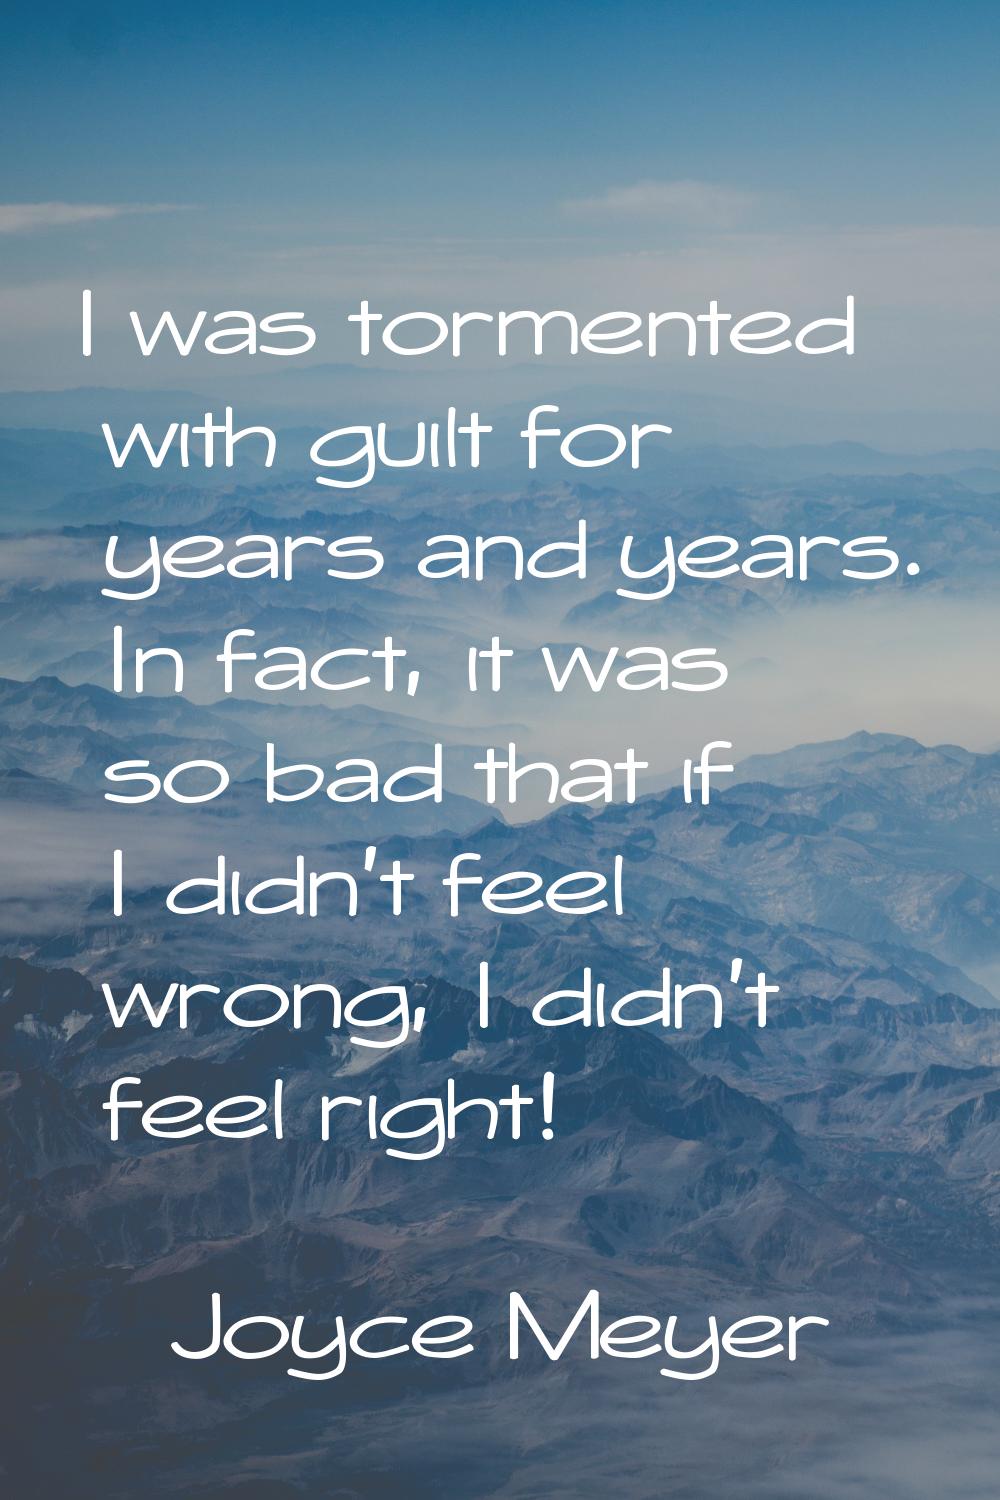 I was tormented with guilt for years and years. In fact, it was so bad that if I didn't feel wrong,